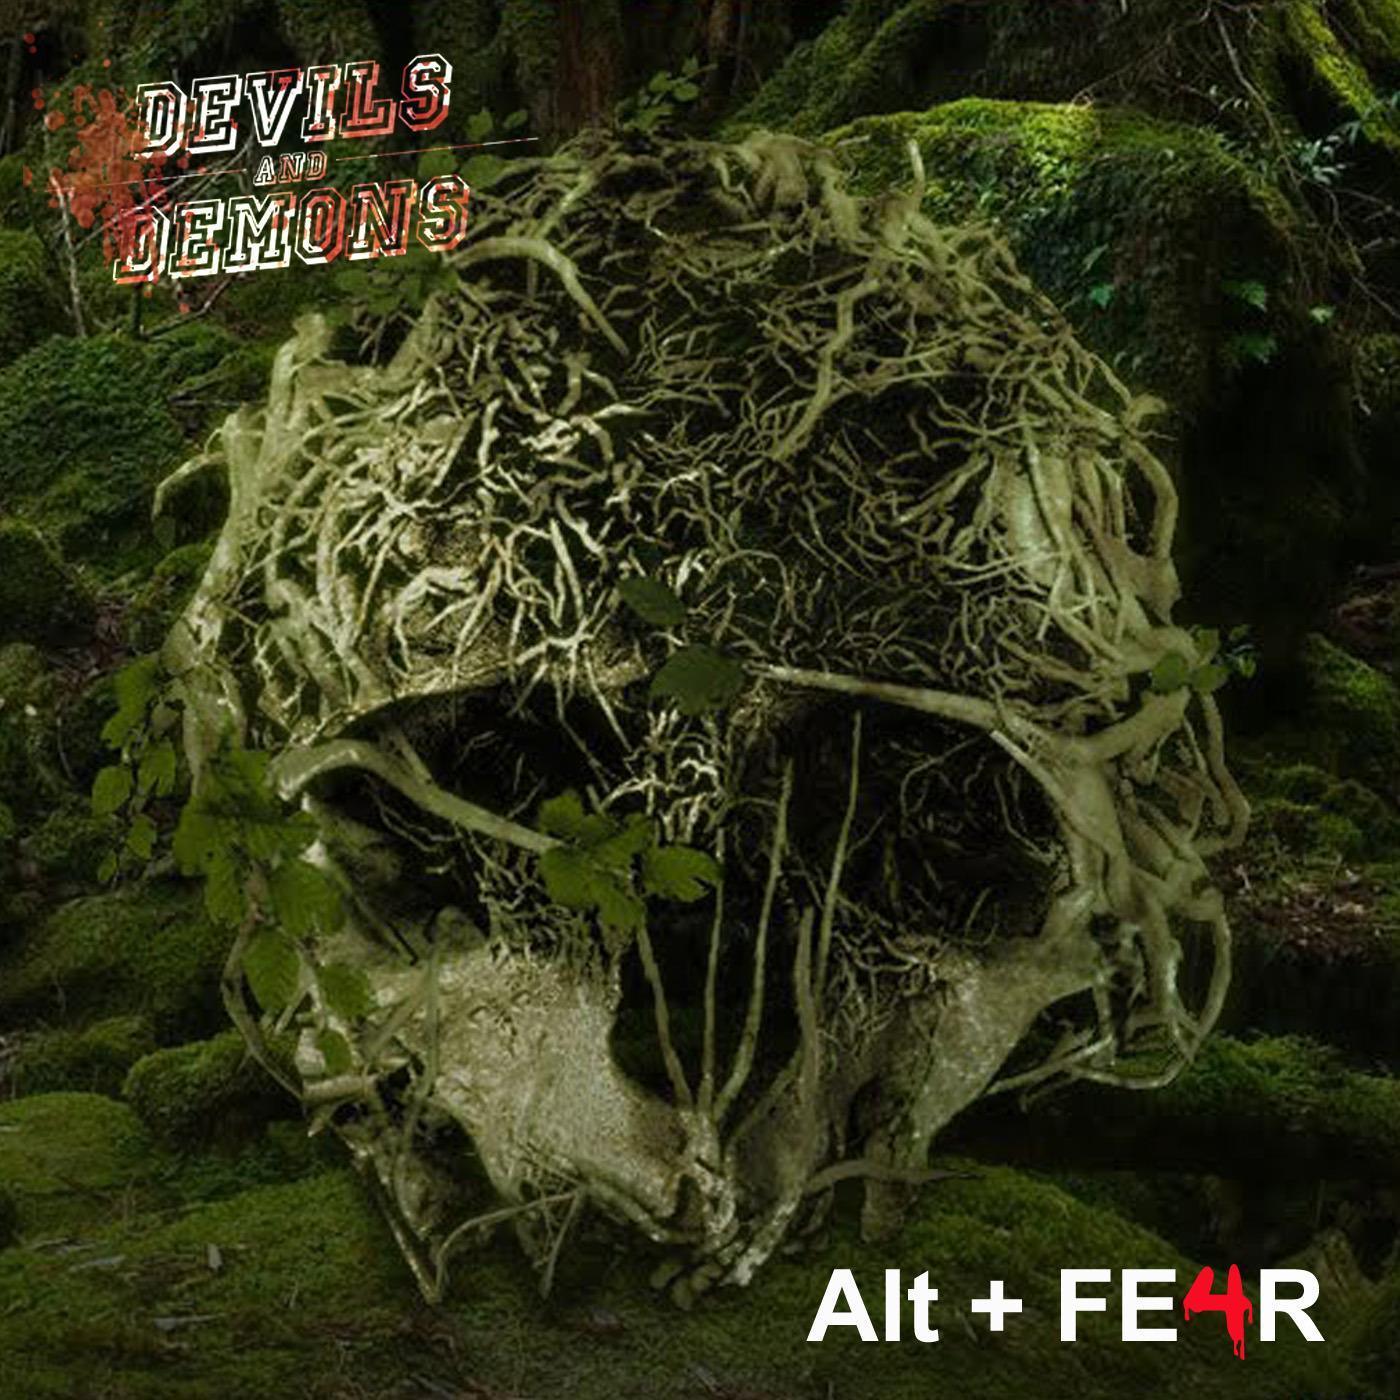 Alt + FE4R 002 - The Forest (2018)